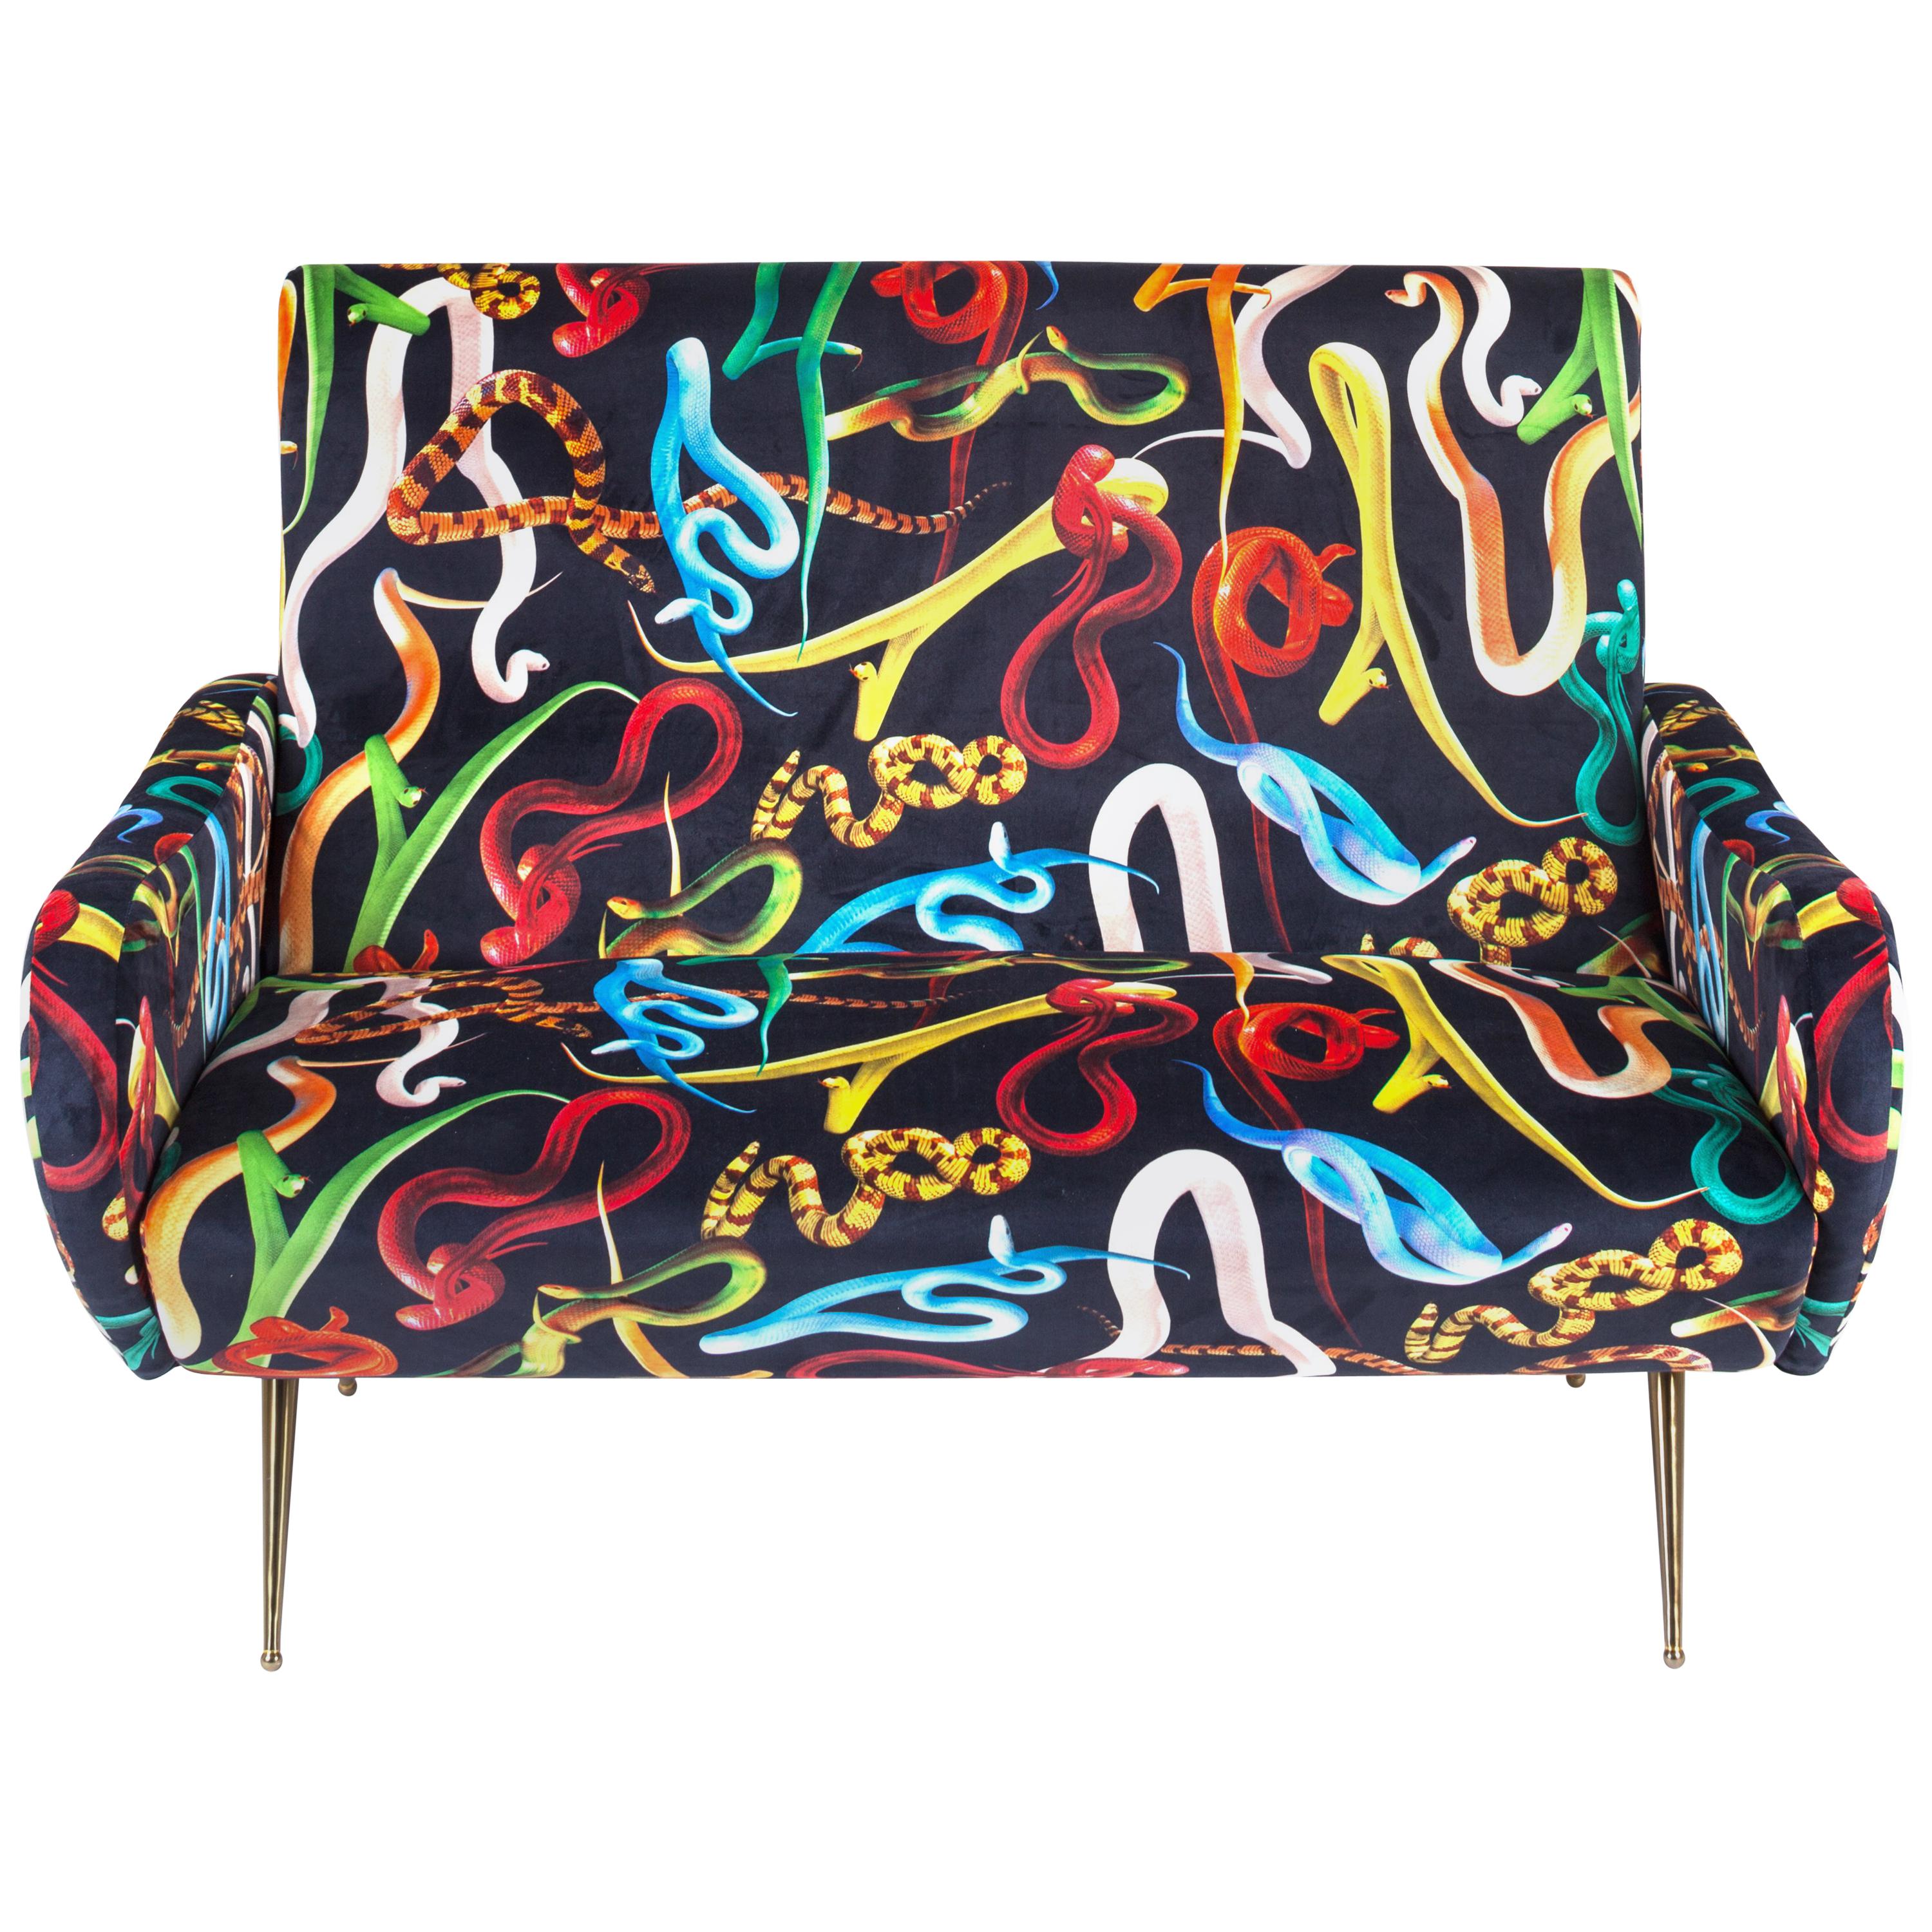 Seletti "Snakes" Upholstered Two-Seat Sofa by Toiletpaper